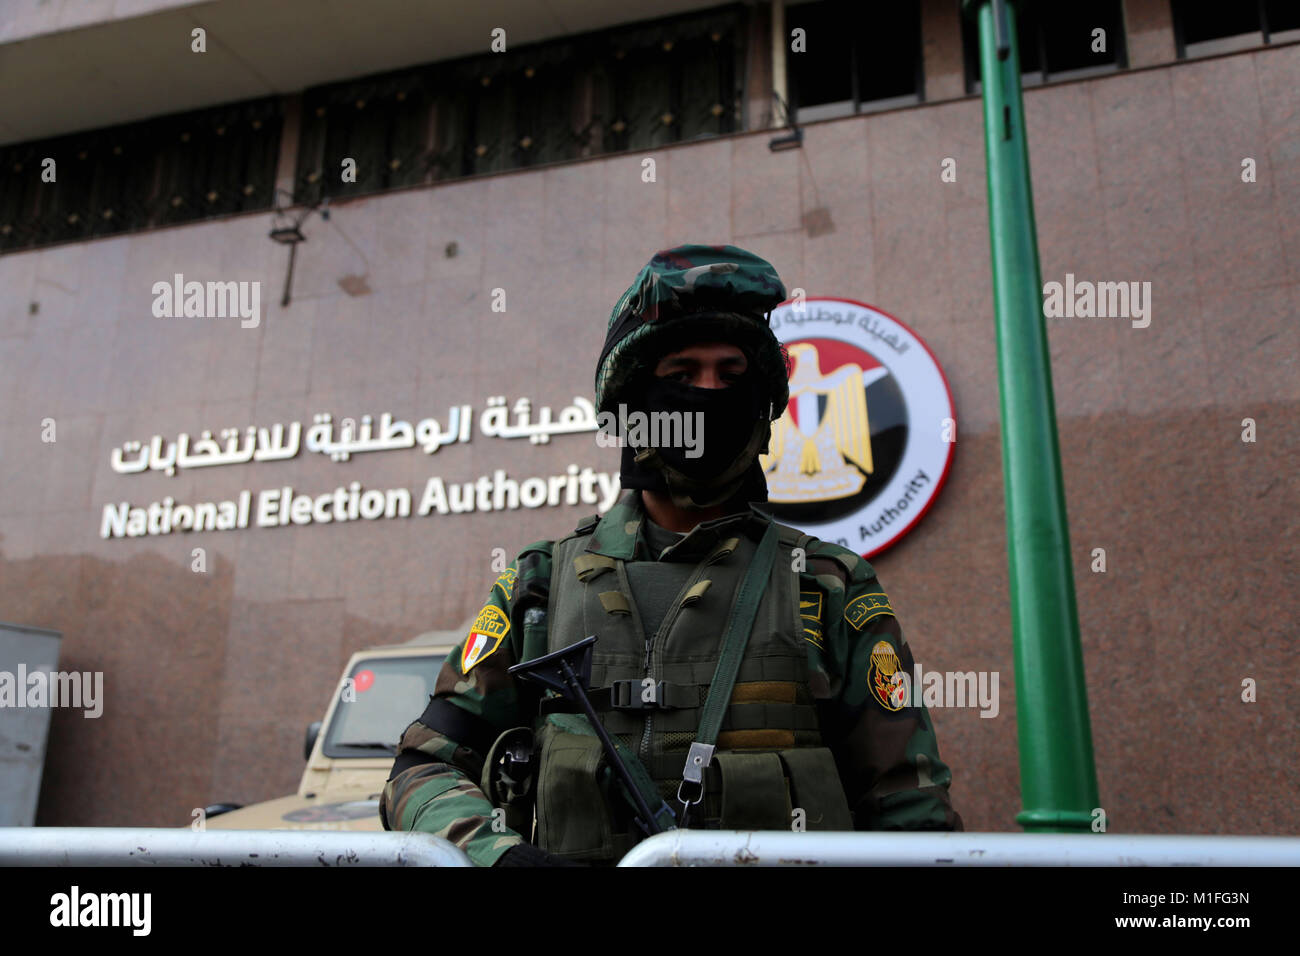 Cairo, Egypt. 29th Jan, 2018. A special forces soldier guards in front of the National Election Authority in Cairo, Egypt, Jan. 29, 2018. The Chairperson of Egypt's Ghad Party, Moussa Mostafa Moussa, presented Monday his candidacy documents for Egyptian presidential elections to the country's election authority, official Ahram Online website reported. Credit: Ahmed Gomaa/Xinhua/Alamy Live News Stock Photo